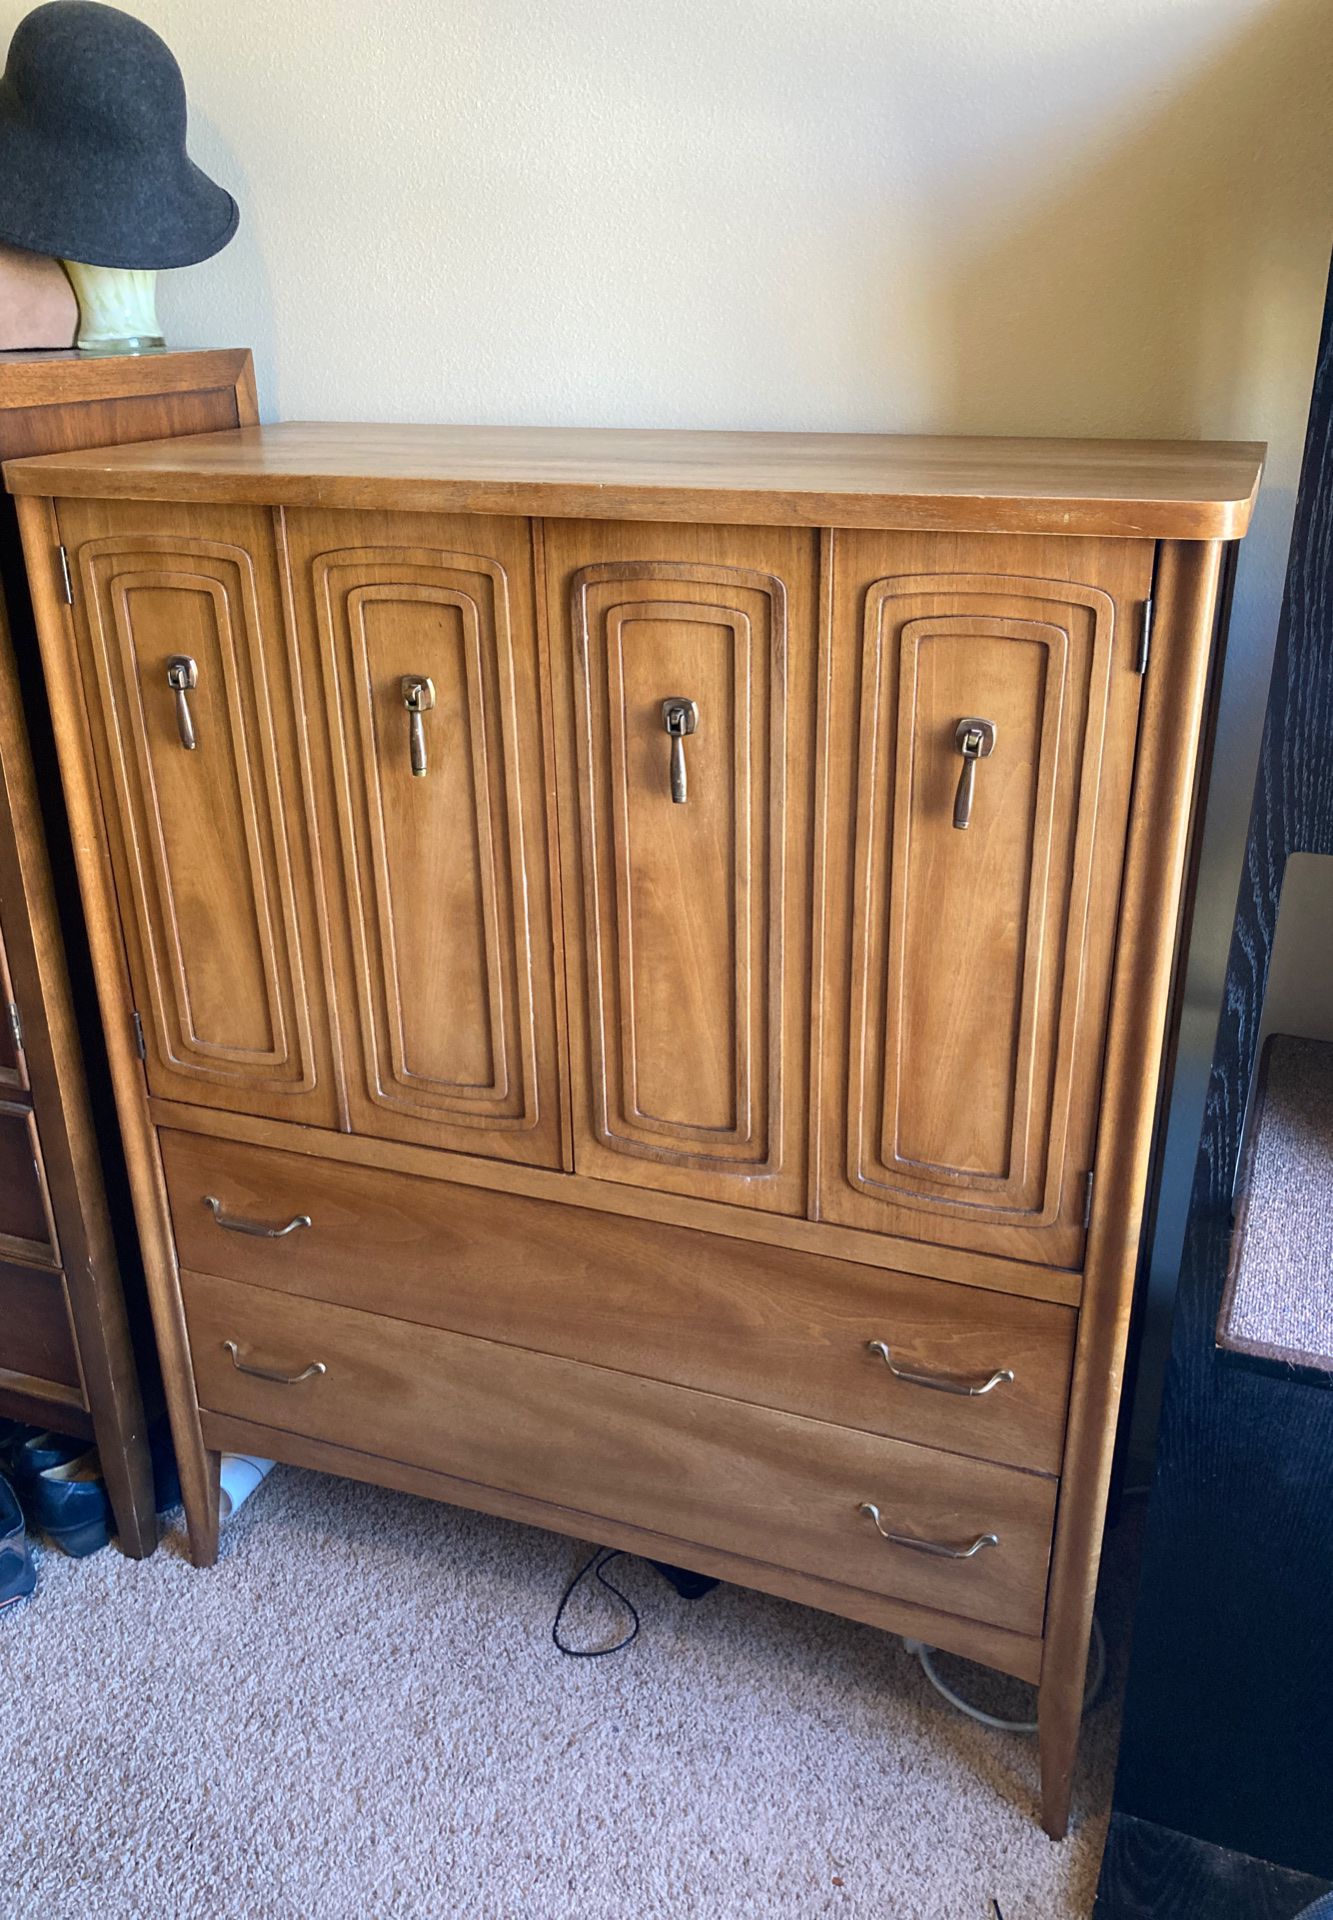 Vintage Armoire - $225 *FIRM*